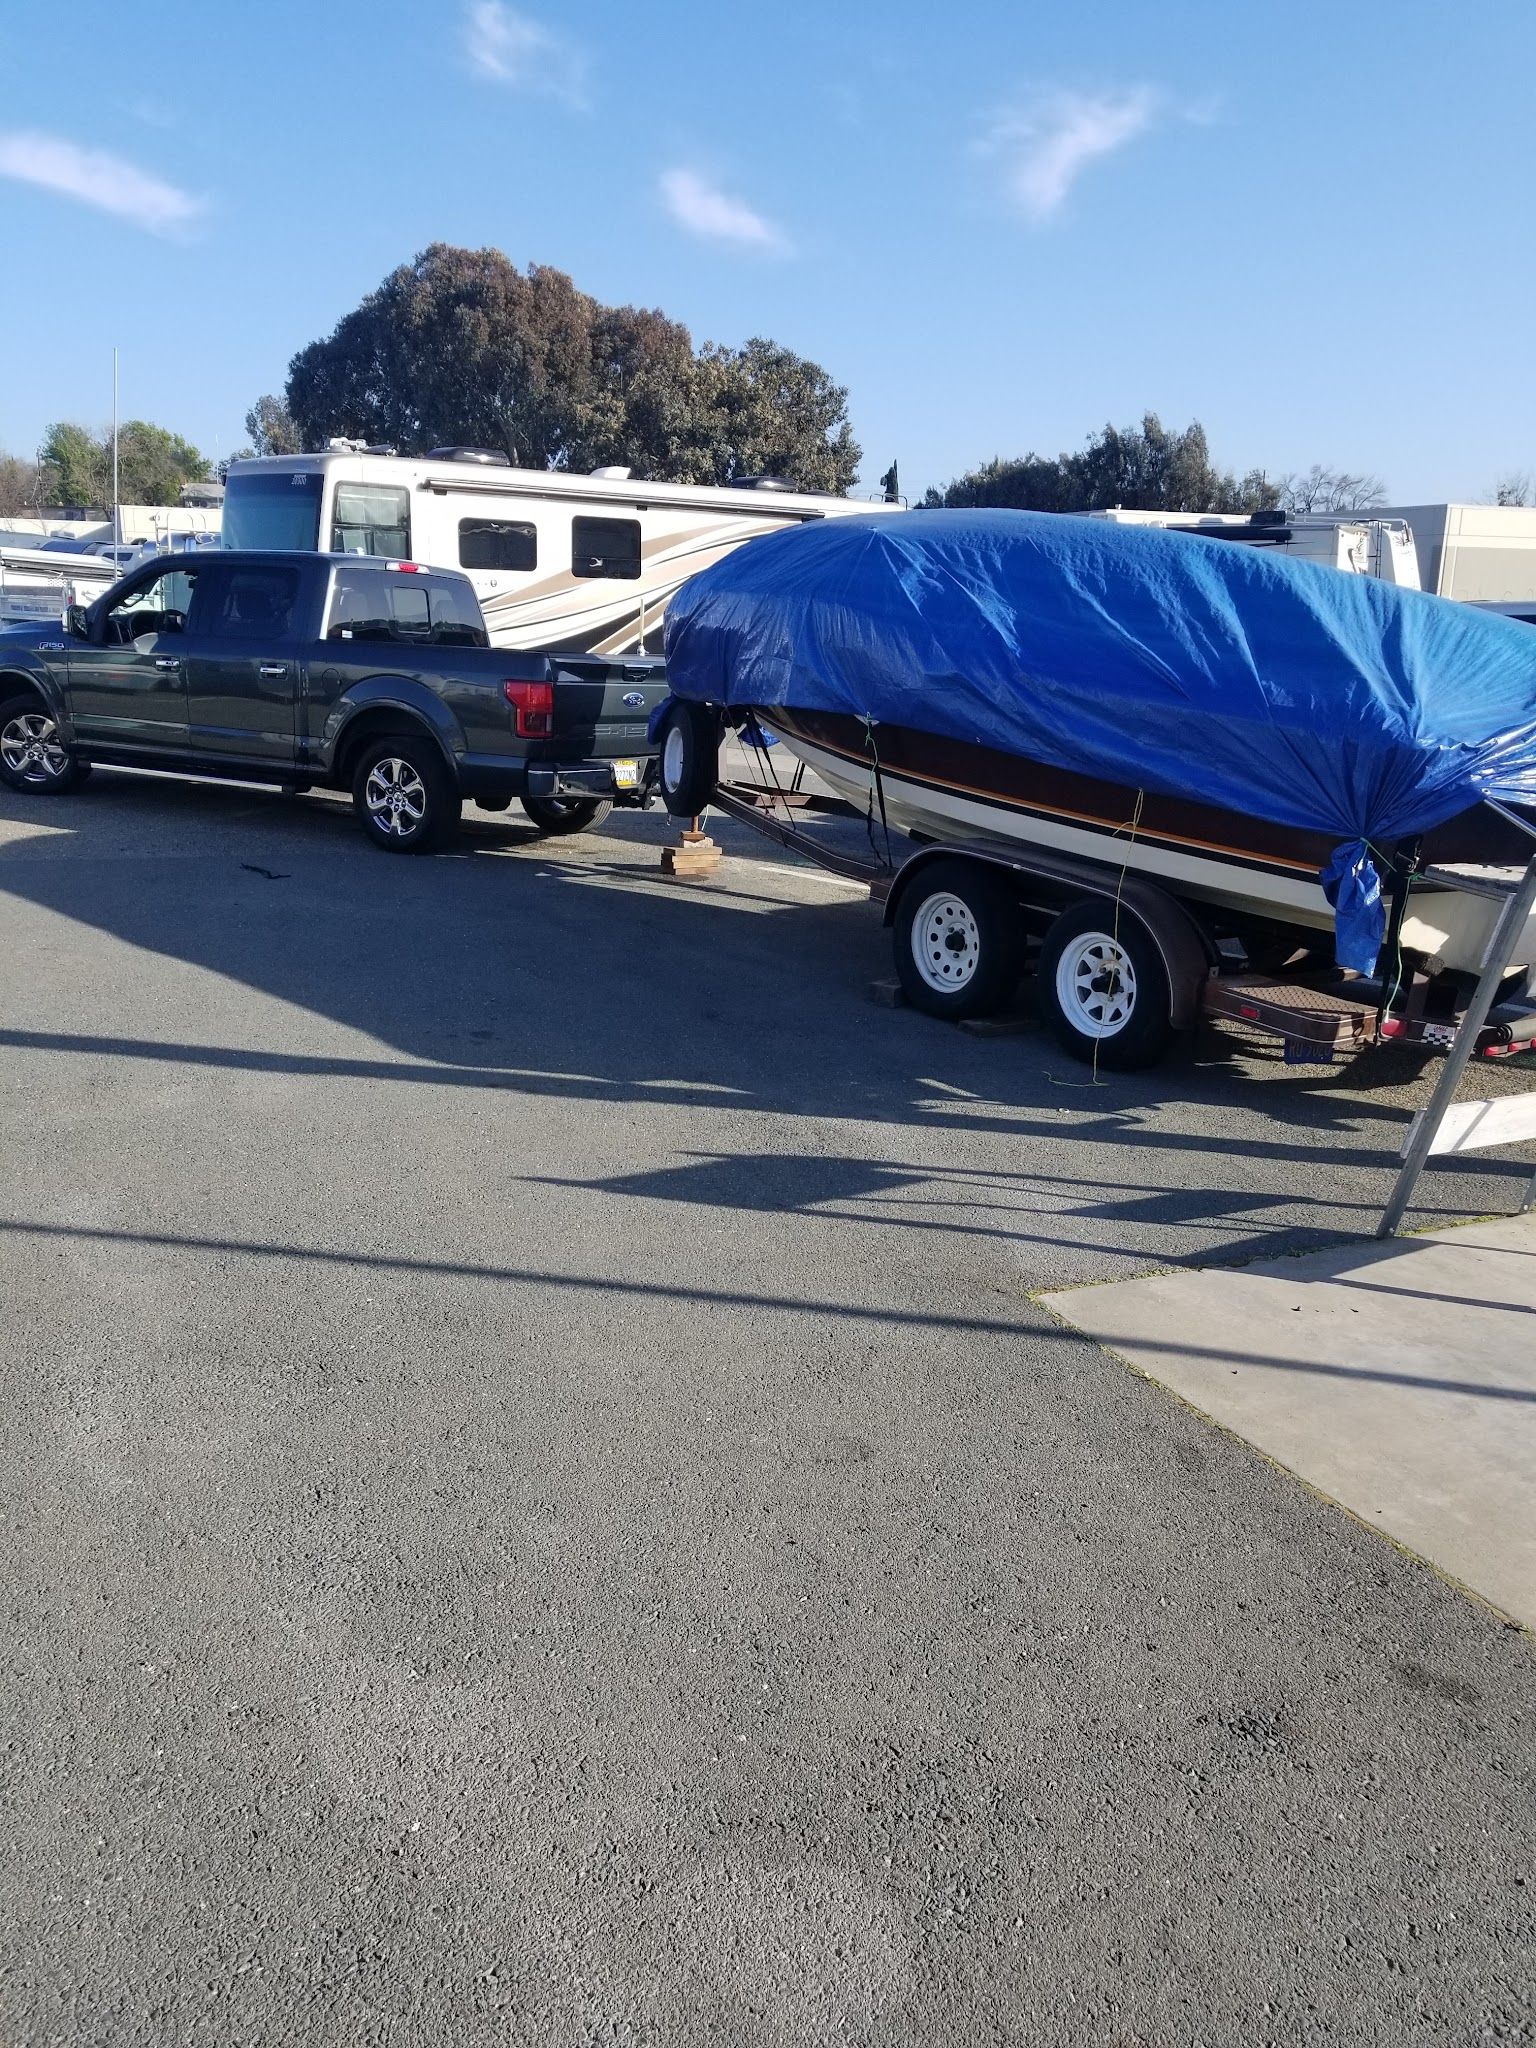 Services & Products Solano RV Parking in Concord CA